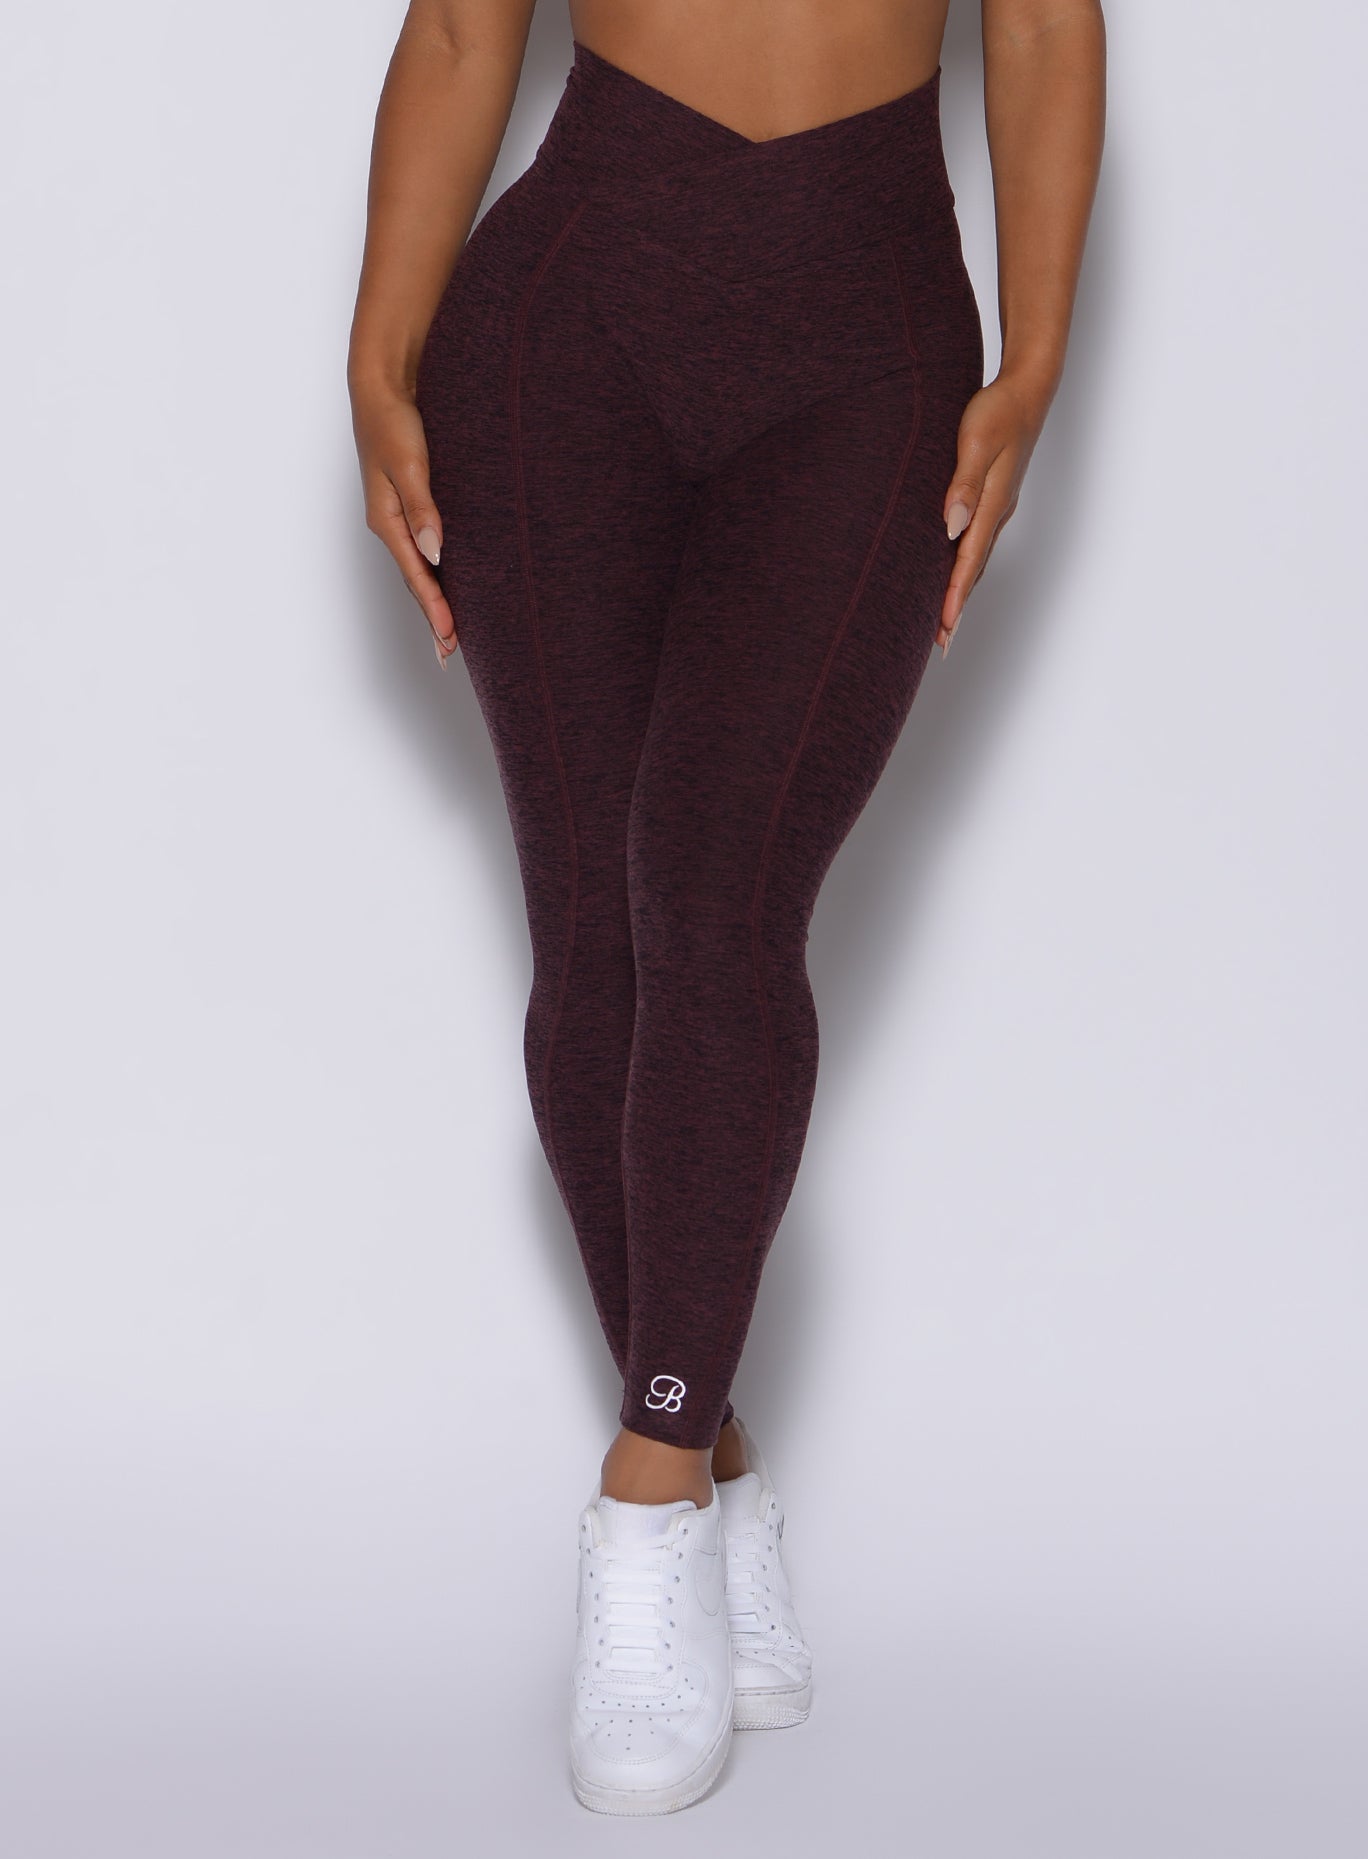 zoomed in front view of our Brazilian contour leggings in port color